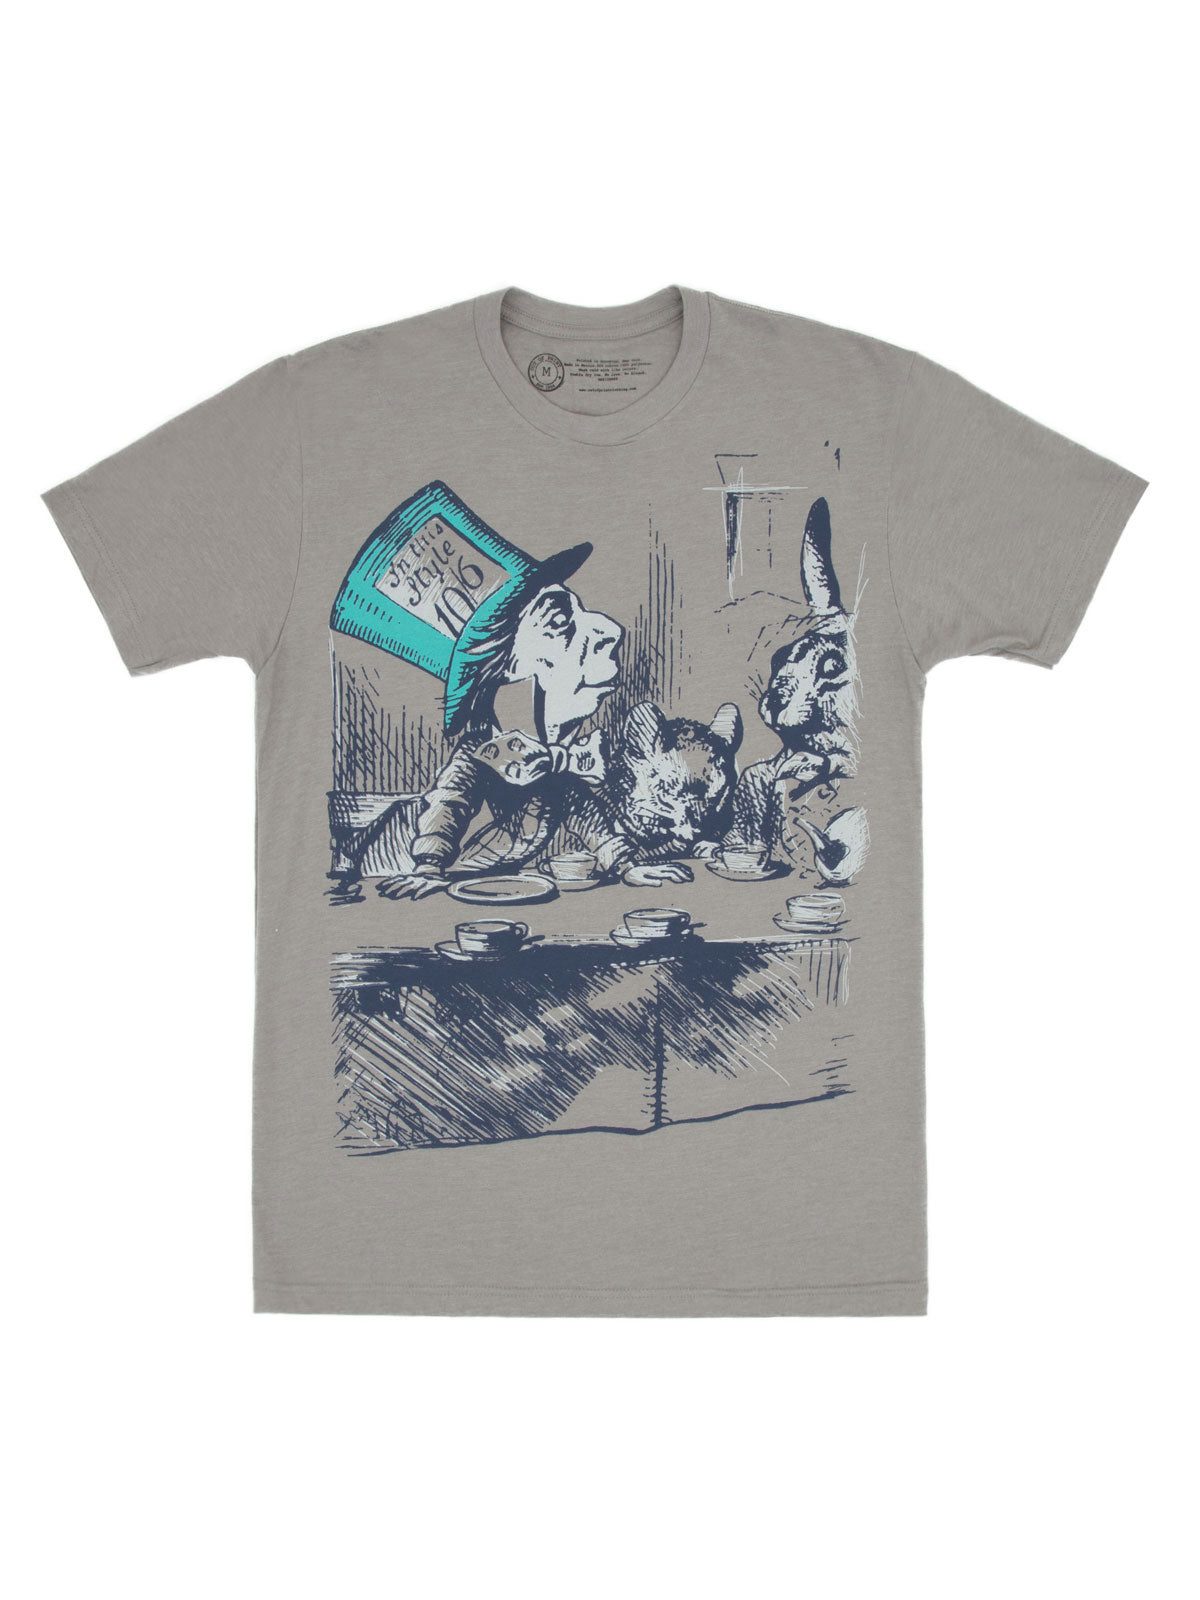 Alice in Wonderland men's book t-shirt — Out of Print